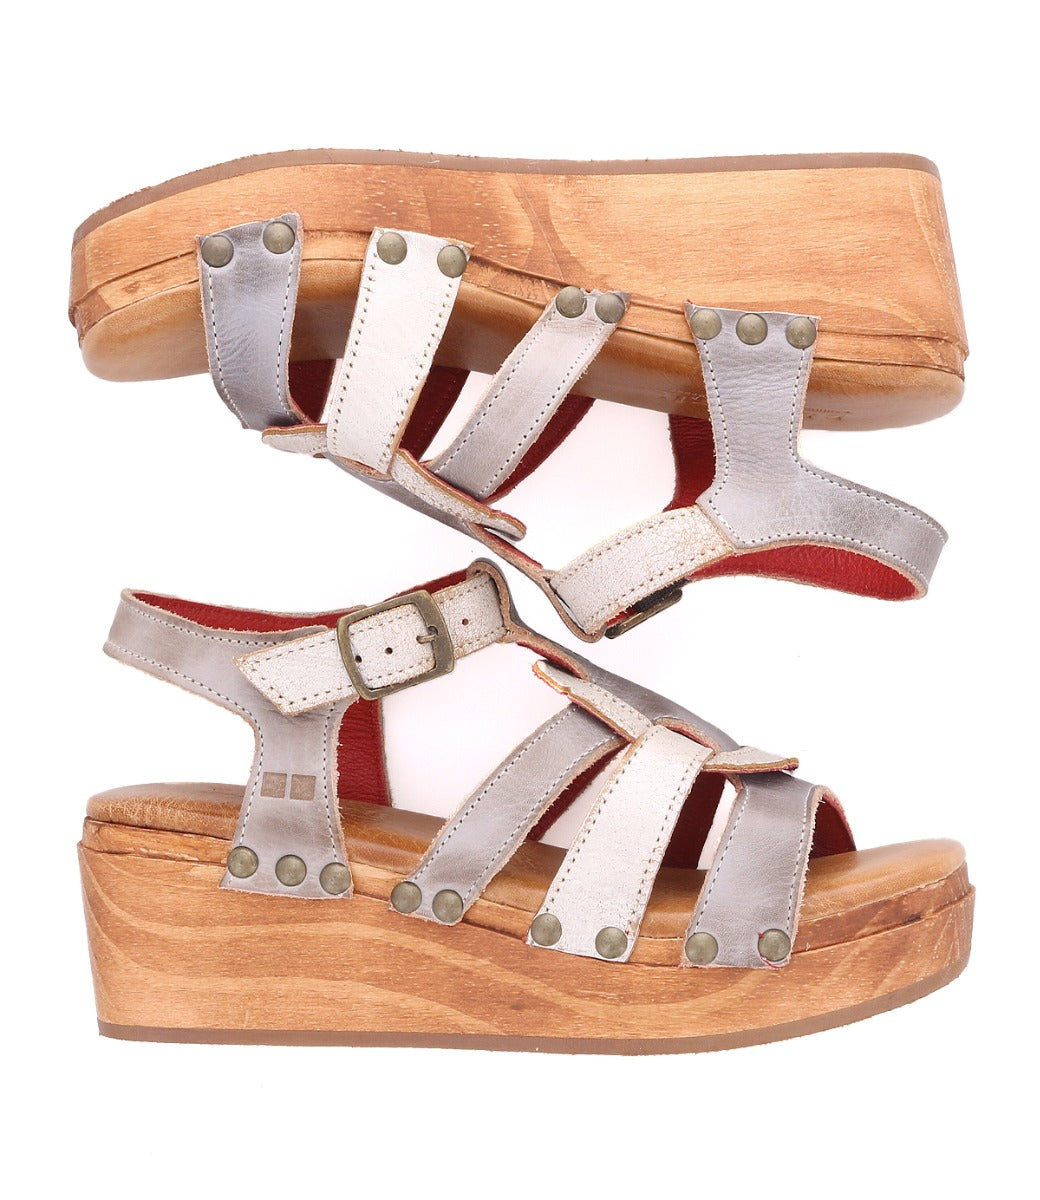 A pair of Fabiola women's sandals with a wooden platform by Bed Stu.